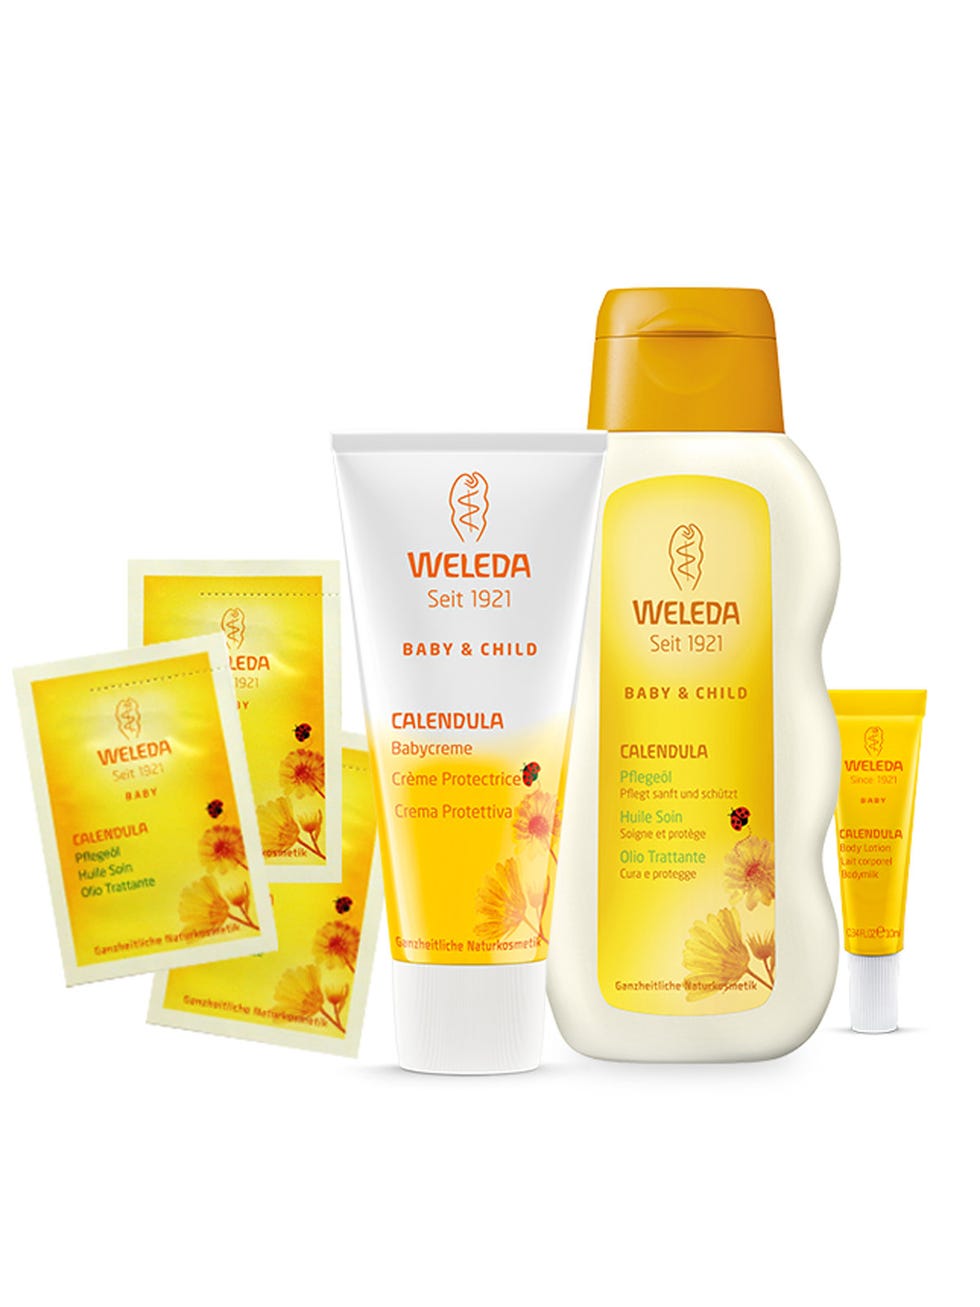 Yellow, Liquid, Packaging and labeling, Skin care, Tan, Cosmetics, Peach, Bottle, Label, Box, 